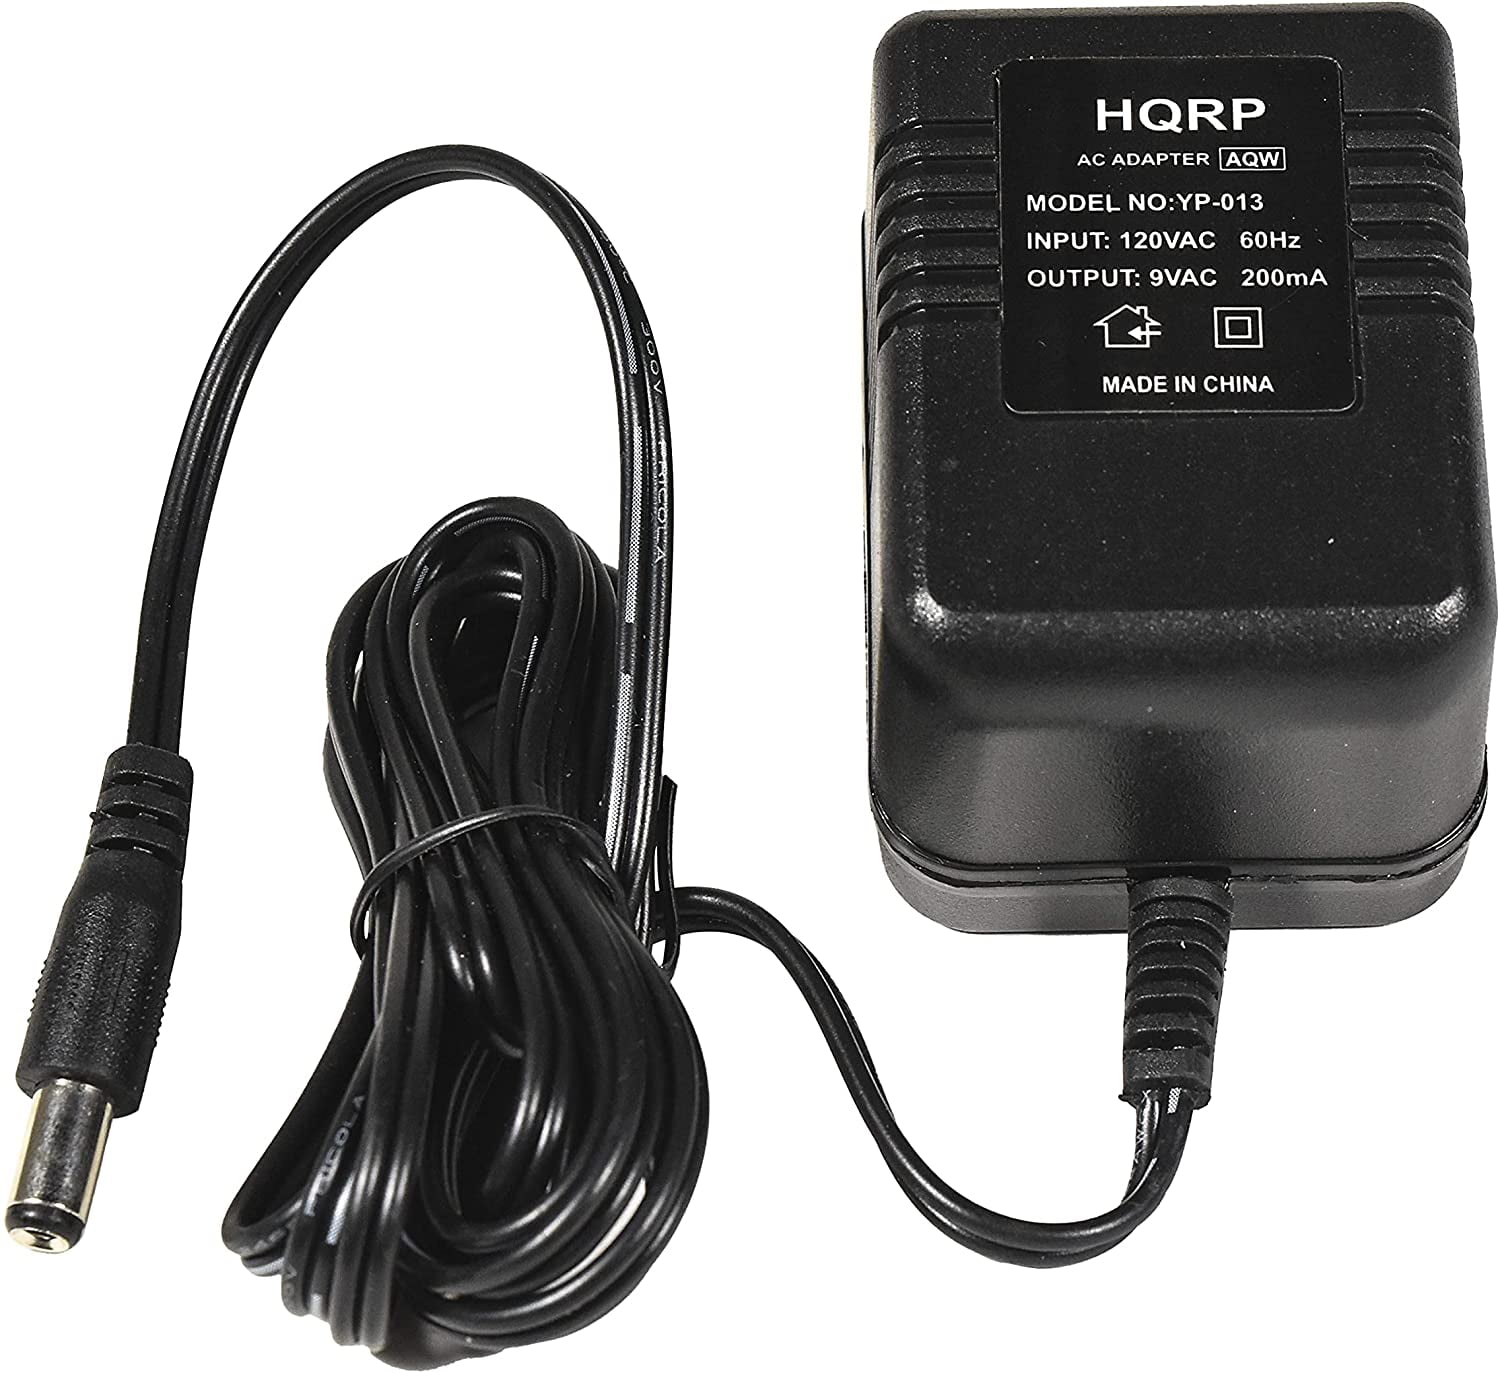 HQRP 887774412191305 AC Adapter for Black & Decker 90560923 fits CHV1510  15.6-Volt Cyclonic Action Cordless Dustbuster Hand Vacuum Vac Charger